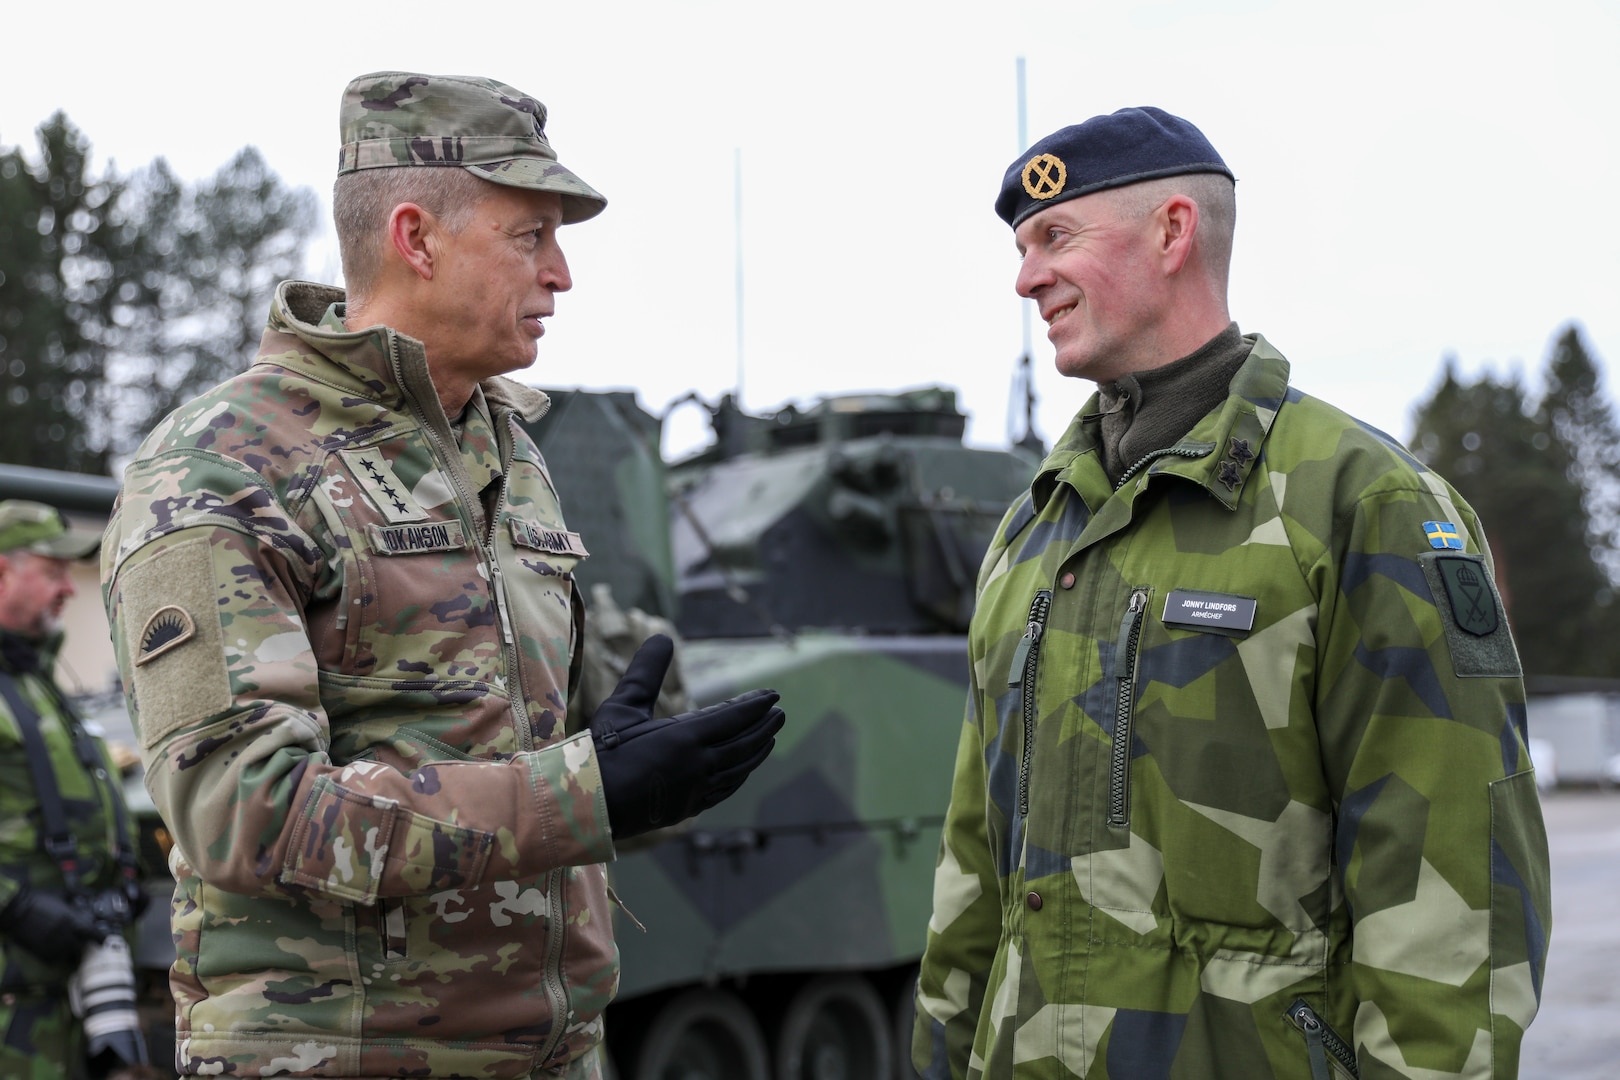 Army Gen. Daniel Hokanson, chief of the National Guard Bureau, meets with members of the Swedish Armed Forces in Boden, Sweden, Oct. 17, 2023. Hokanson visited Sweden as part of a larger Northern European itinerary for talks with defense officials to deepen bilateral ties between the National Guard and Sweden.